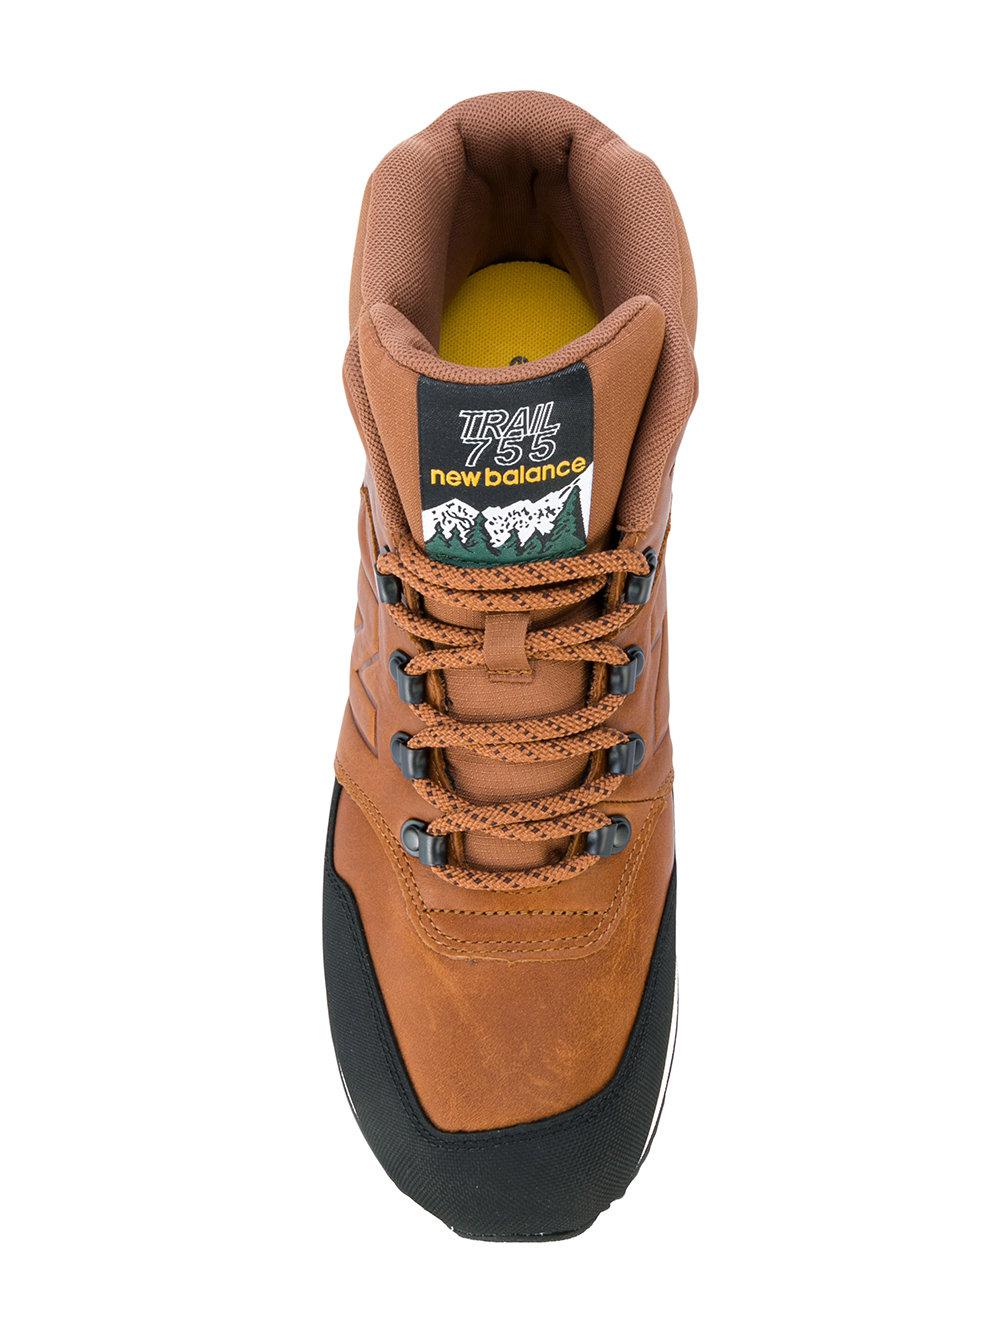 New Balance Synthetic Sneakers '755 Winter' in Brown for Men - Lyst